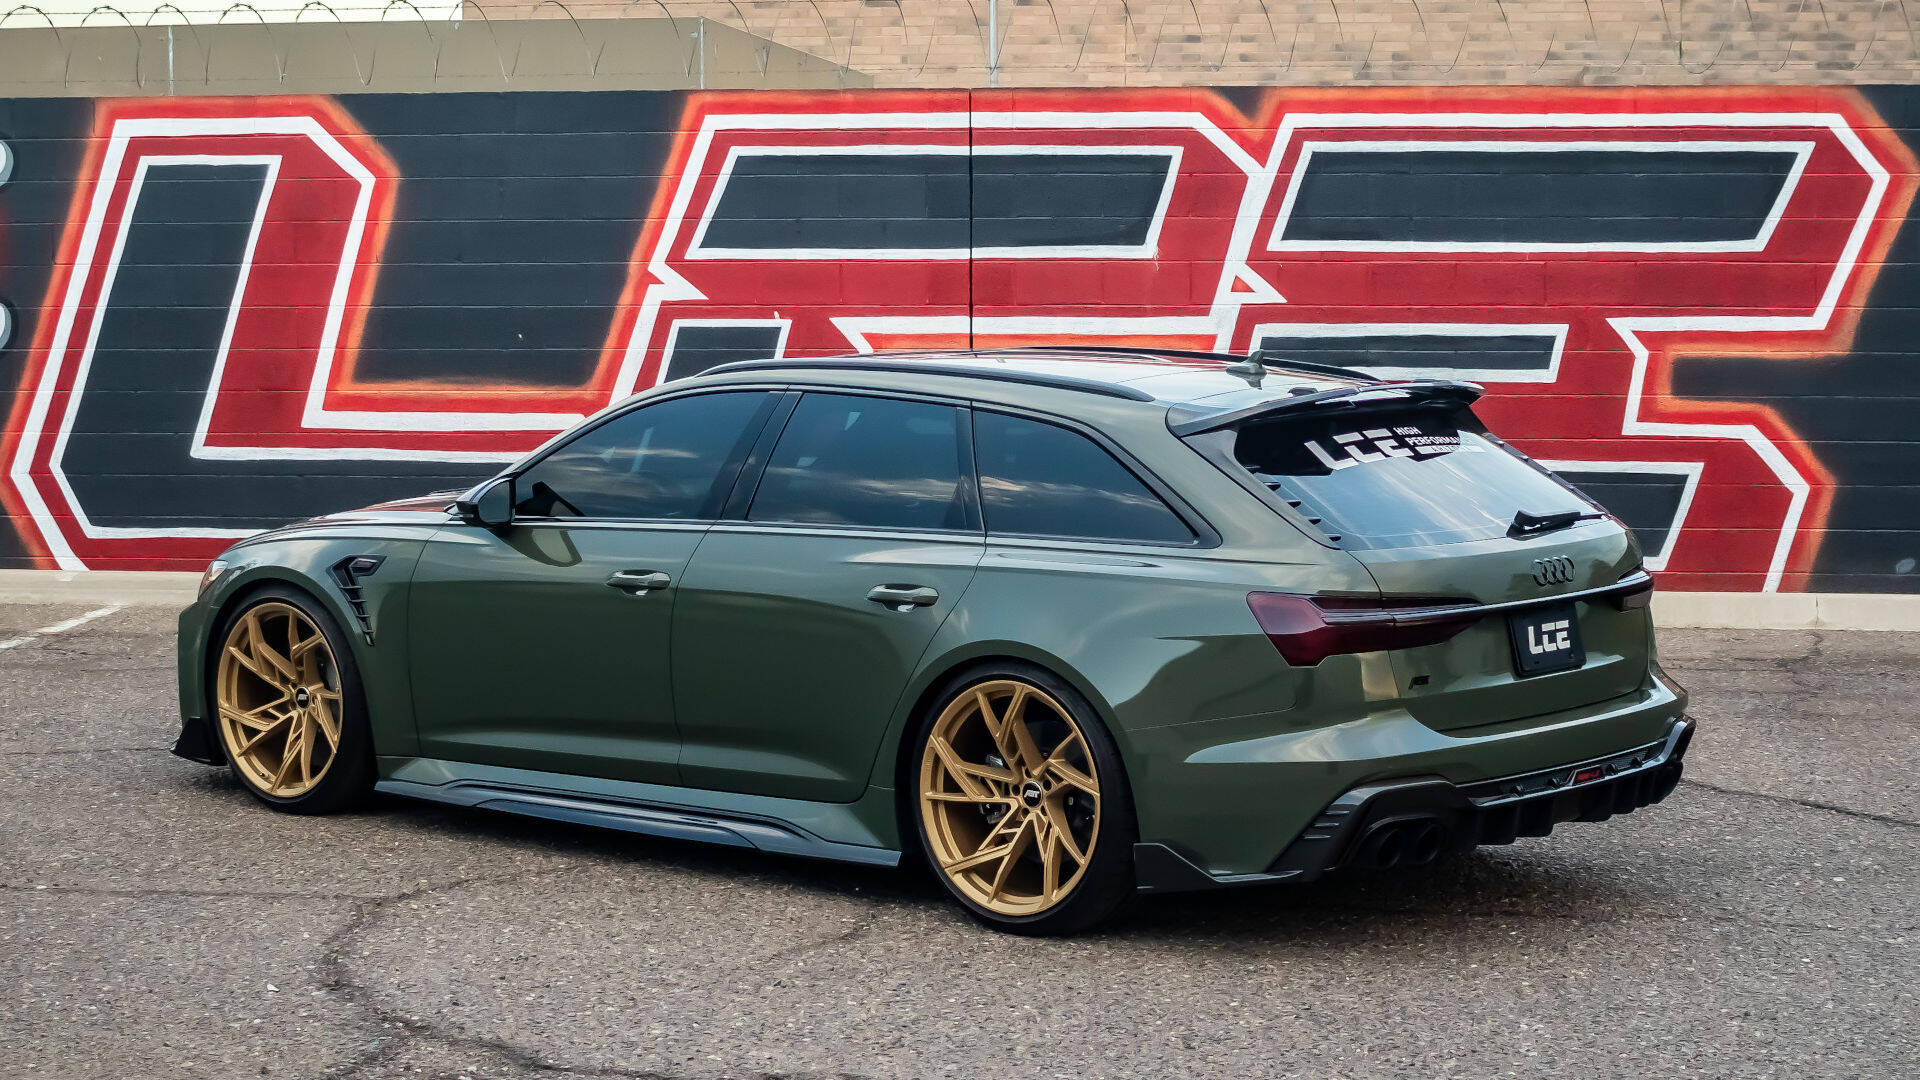 ABT's Audi RS6 Legacy Edition Is A Pricey 750-HP Wagon Limited To 200 Units